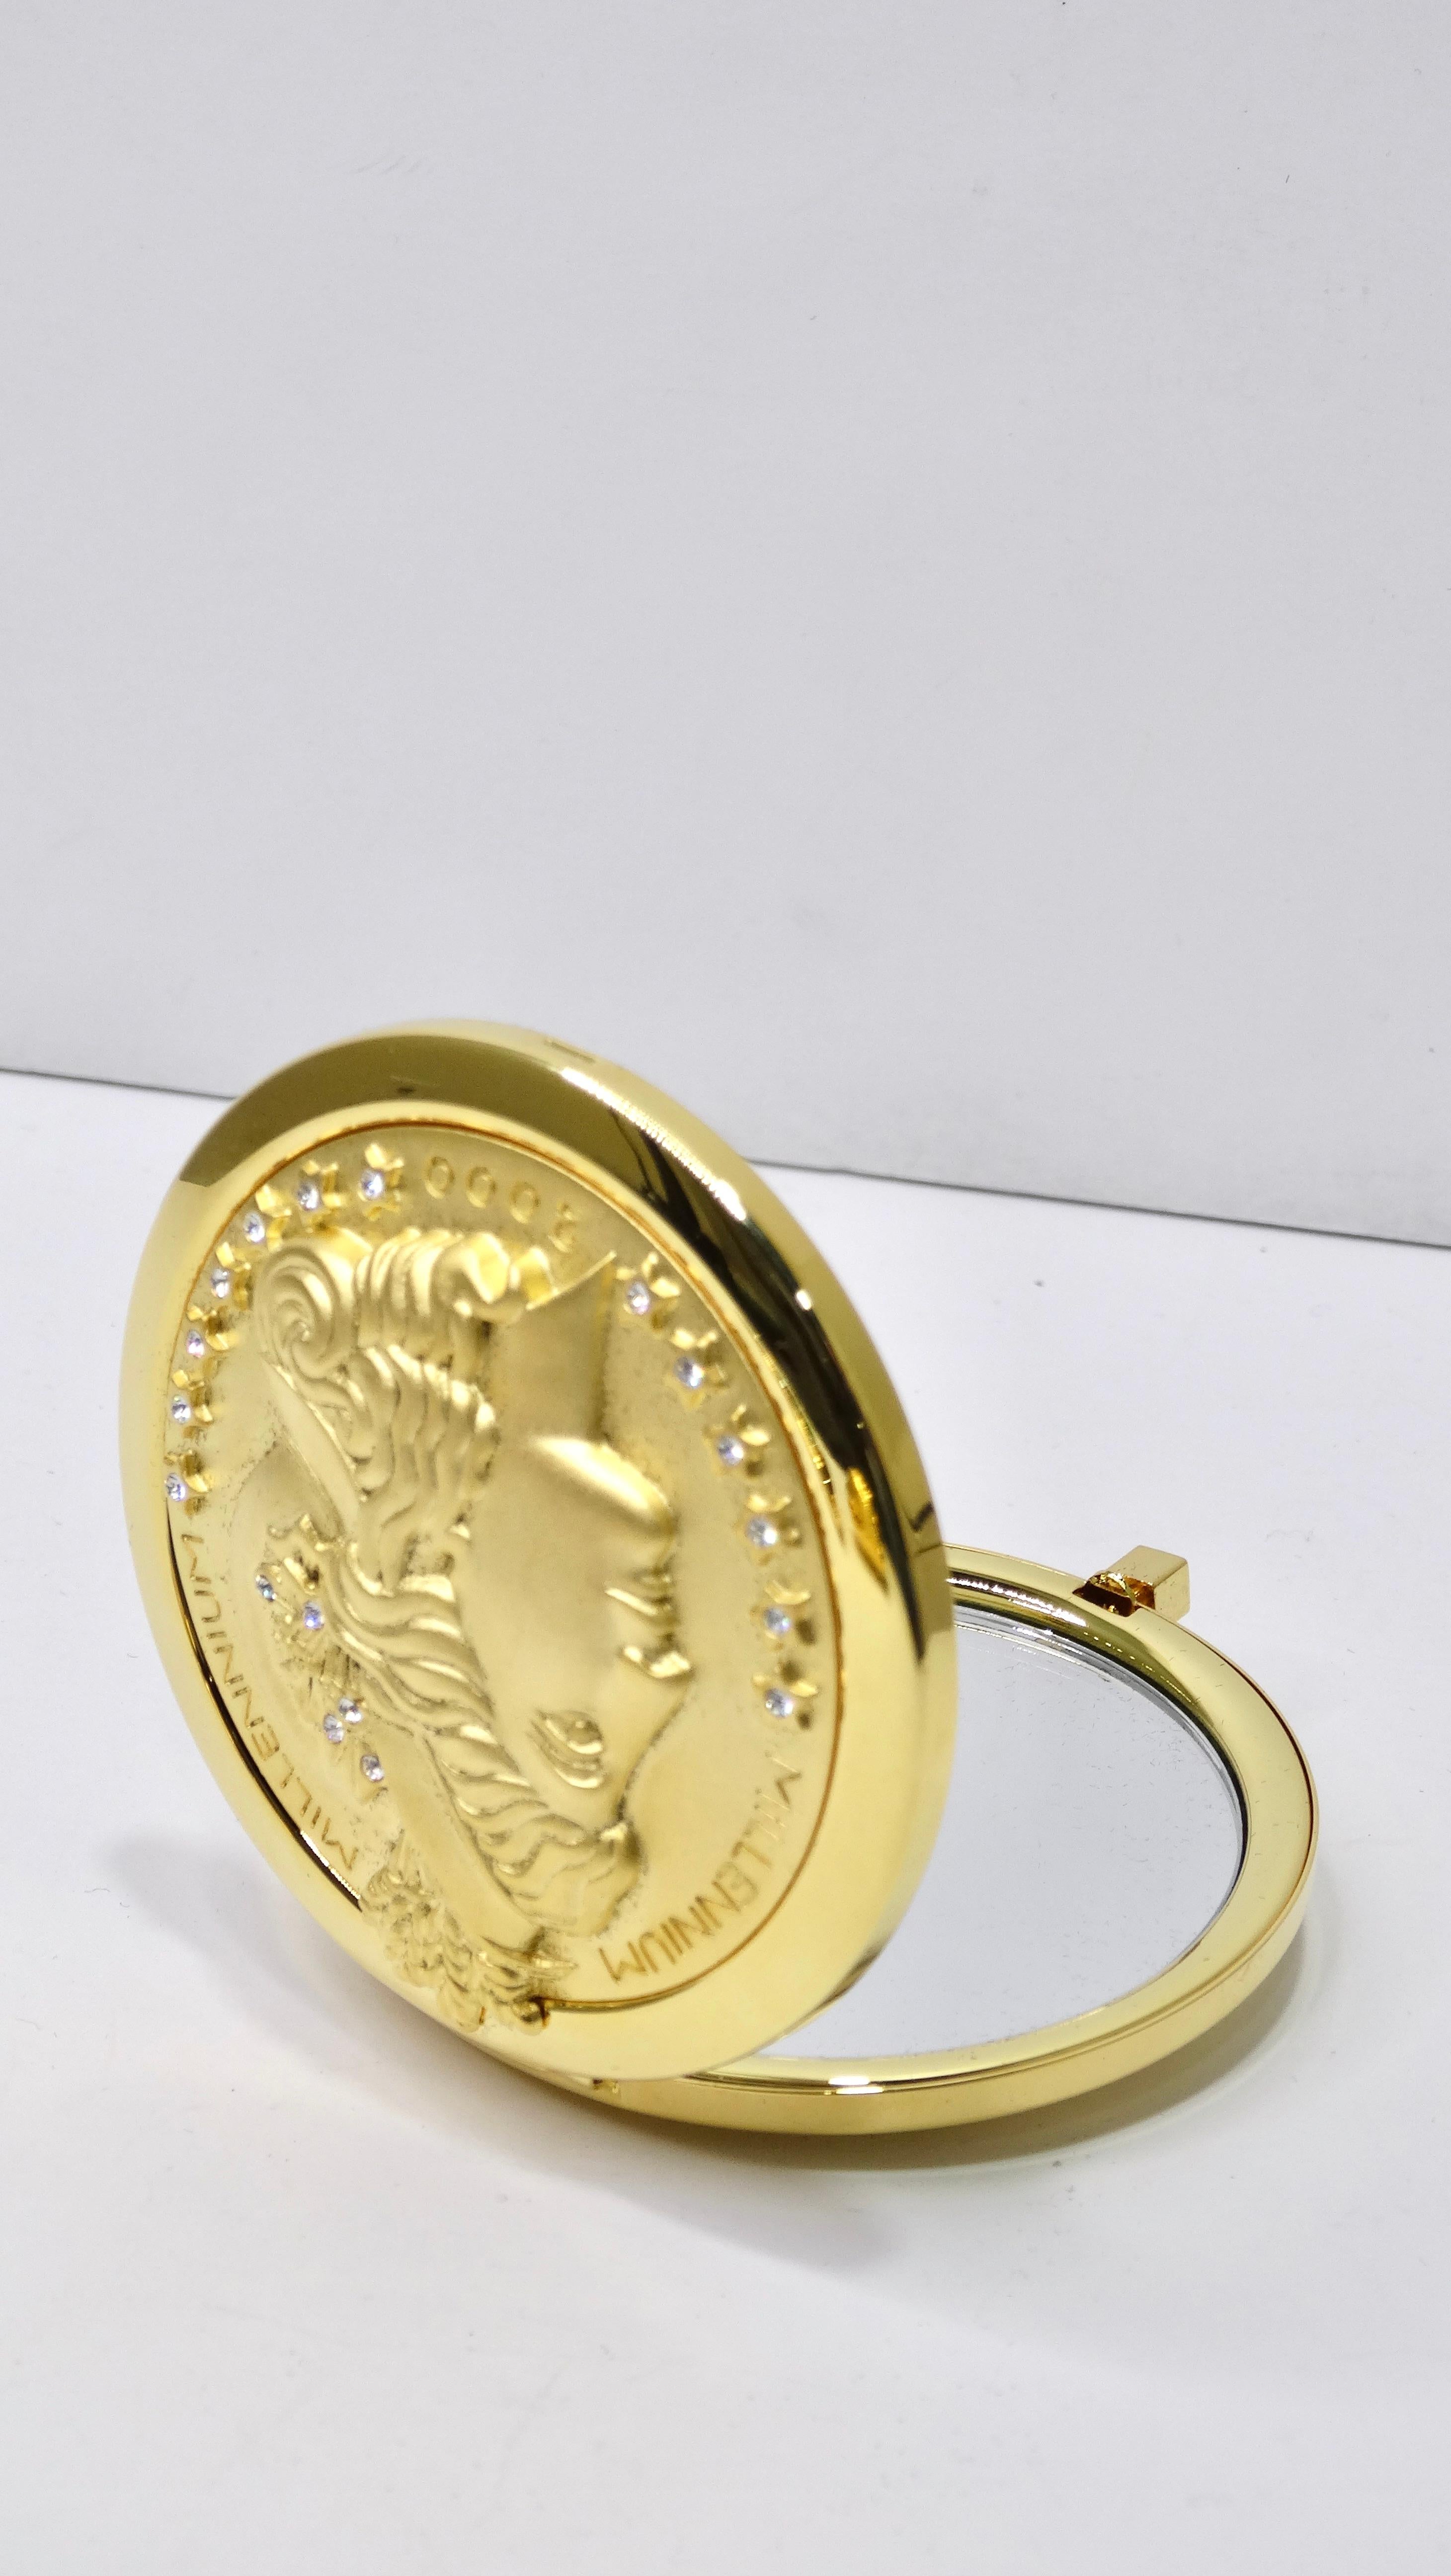 This is a highly sought after accessory! Nothing is more luxurious than this gold coin shaped compact encrusted in crystals. Touch up your makeup in style with this exquisite find. This is a beautifully crafted vintage Lady Liberty millennium coin